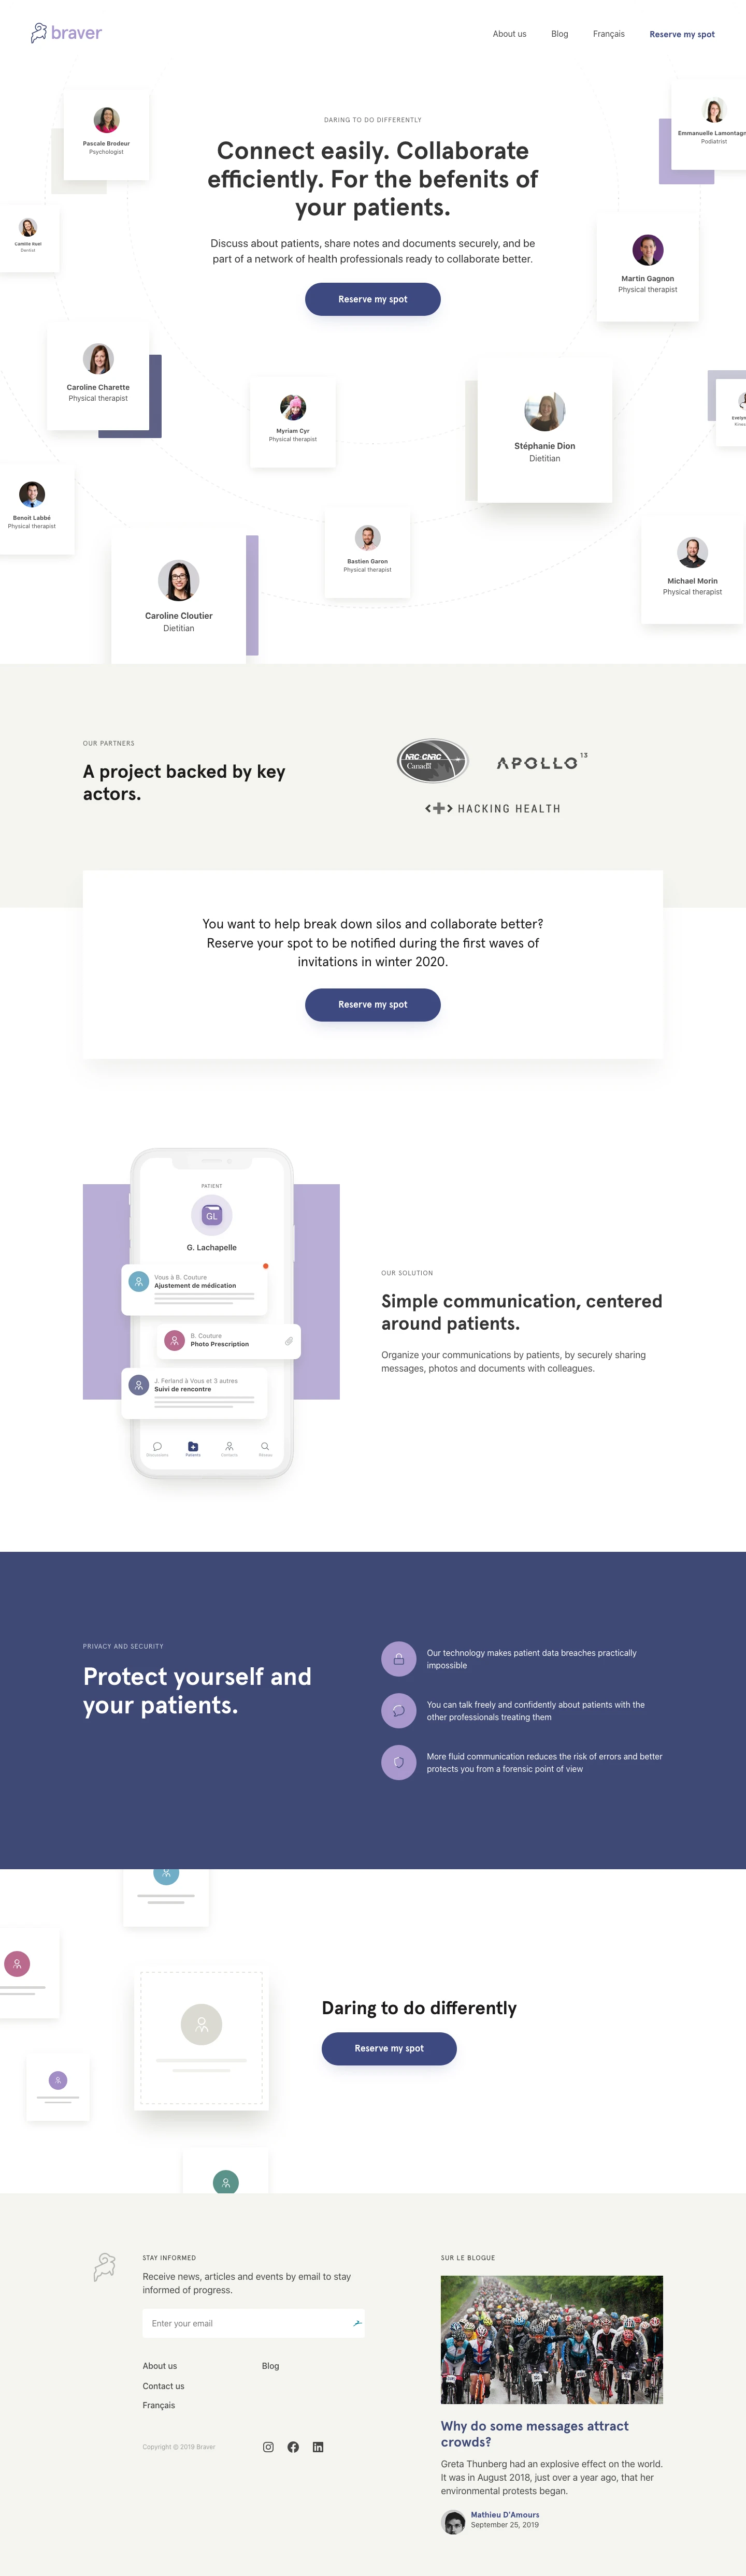 Braver Landing Page Example: Discuss about patients, share notes and documents securely, and be part of a network of health professionals ready to collaborate better.